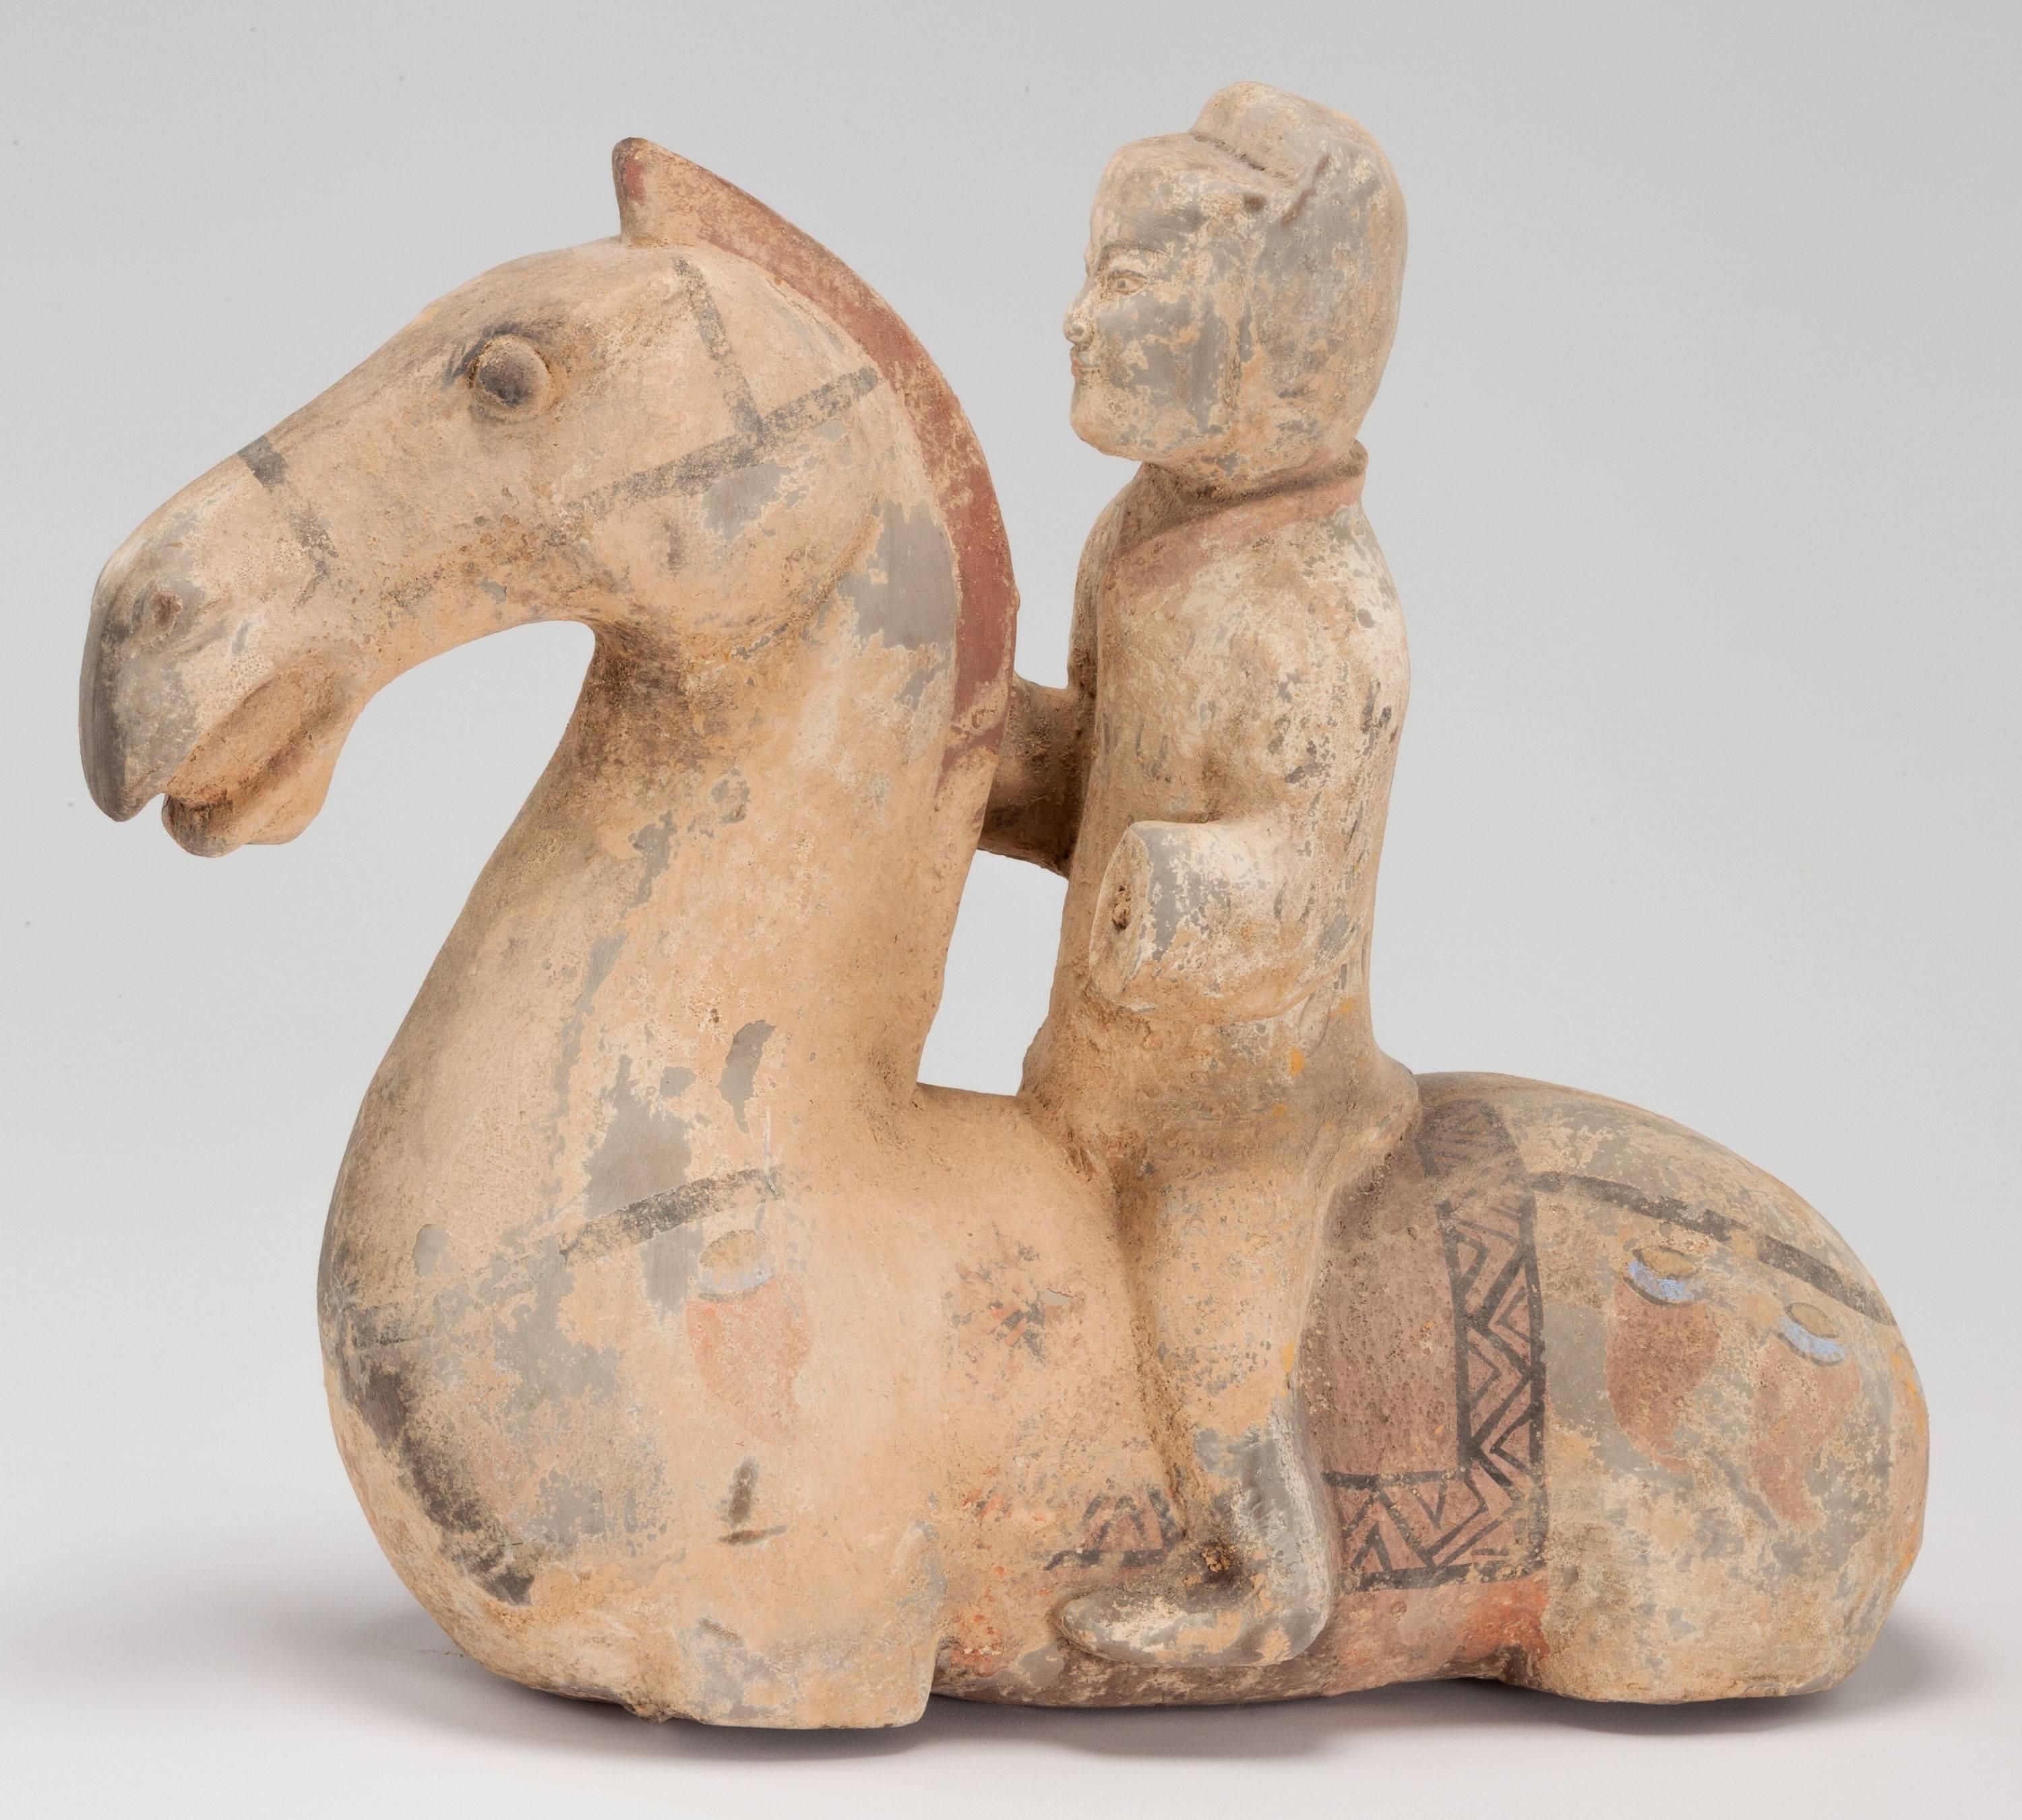 A Chinese Han unglazed earthenware horse and rider with traces of polychrome paint (probably more recent). Similar but more rare and beautiful to Tang artifacts; this statue will command attention and compliment any serious collection.